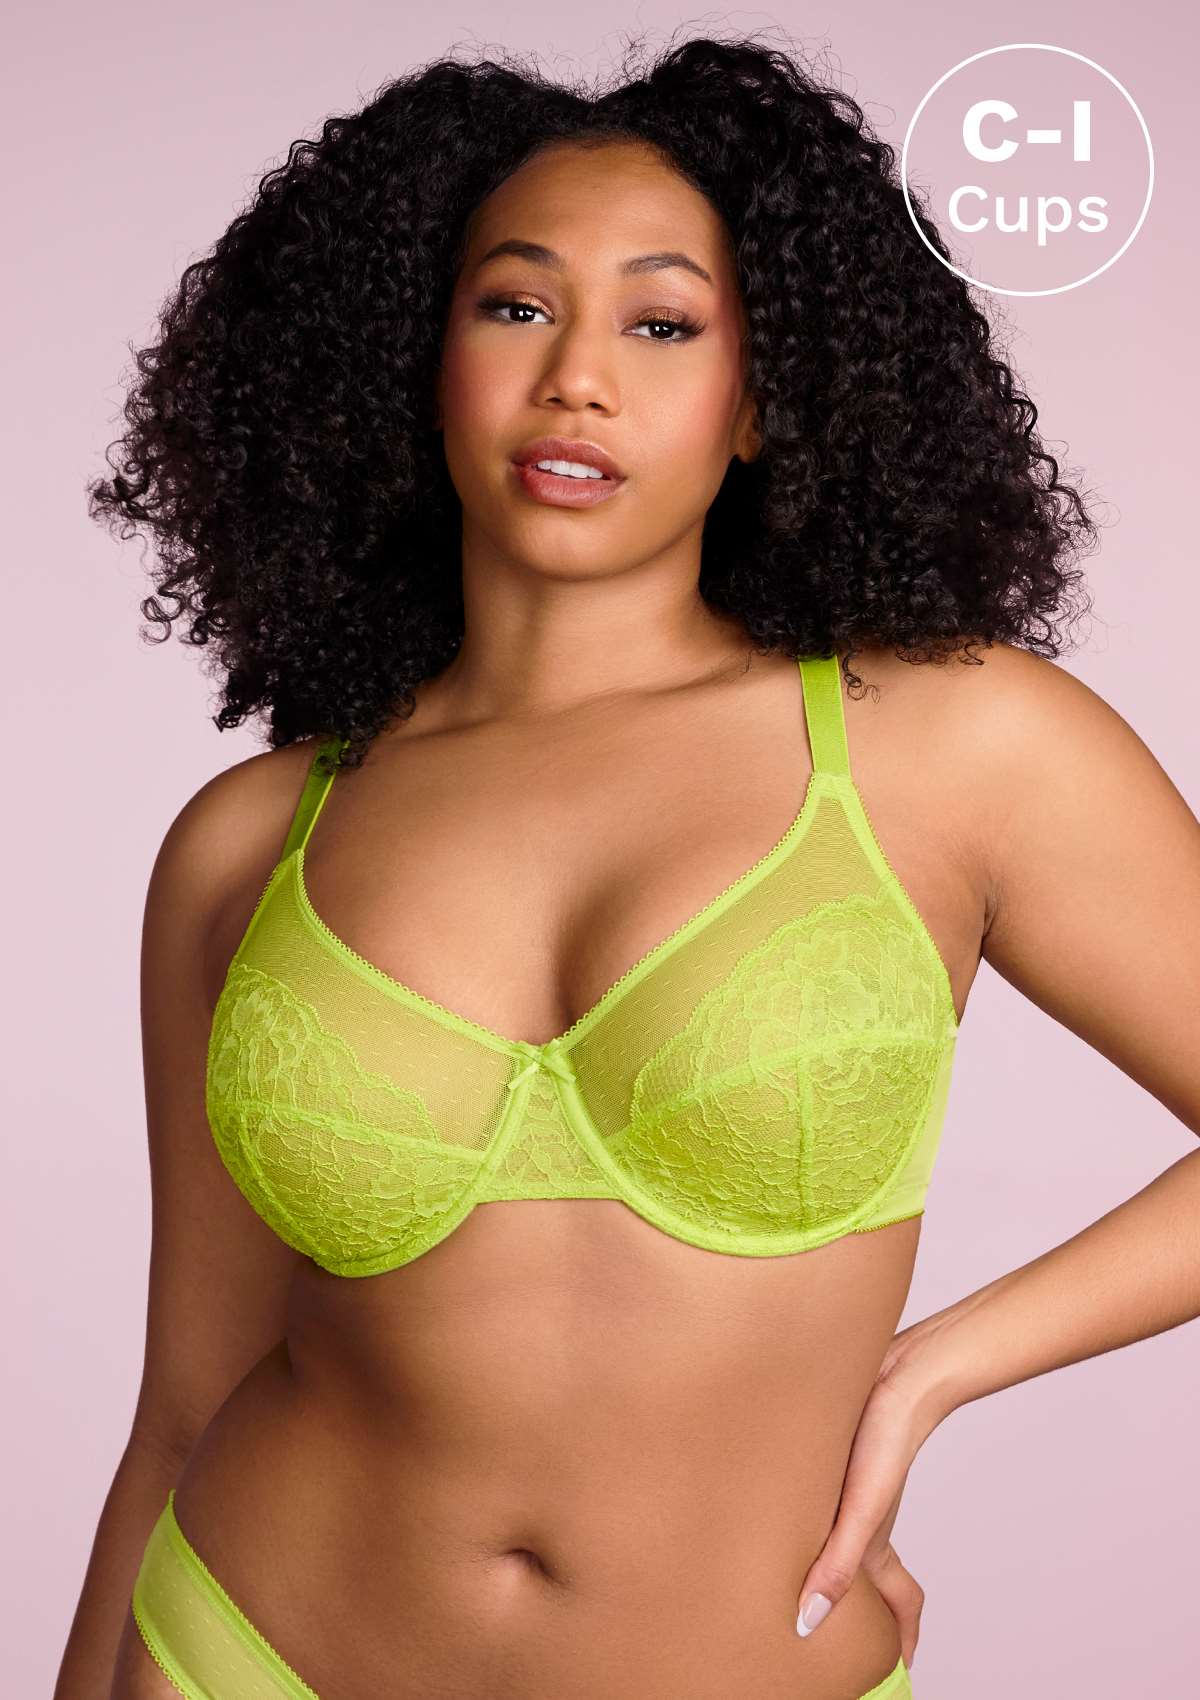 HSIA Enchante Full Cup Minimizing Bra: Supportive Unlined Lace Bra - Lime Green / 42 / C